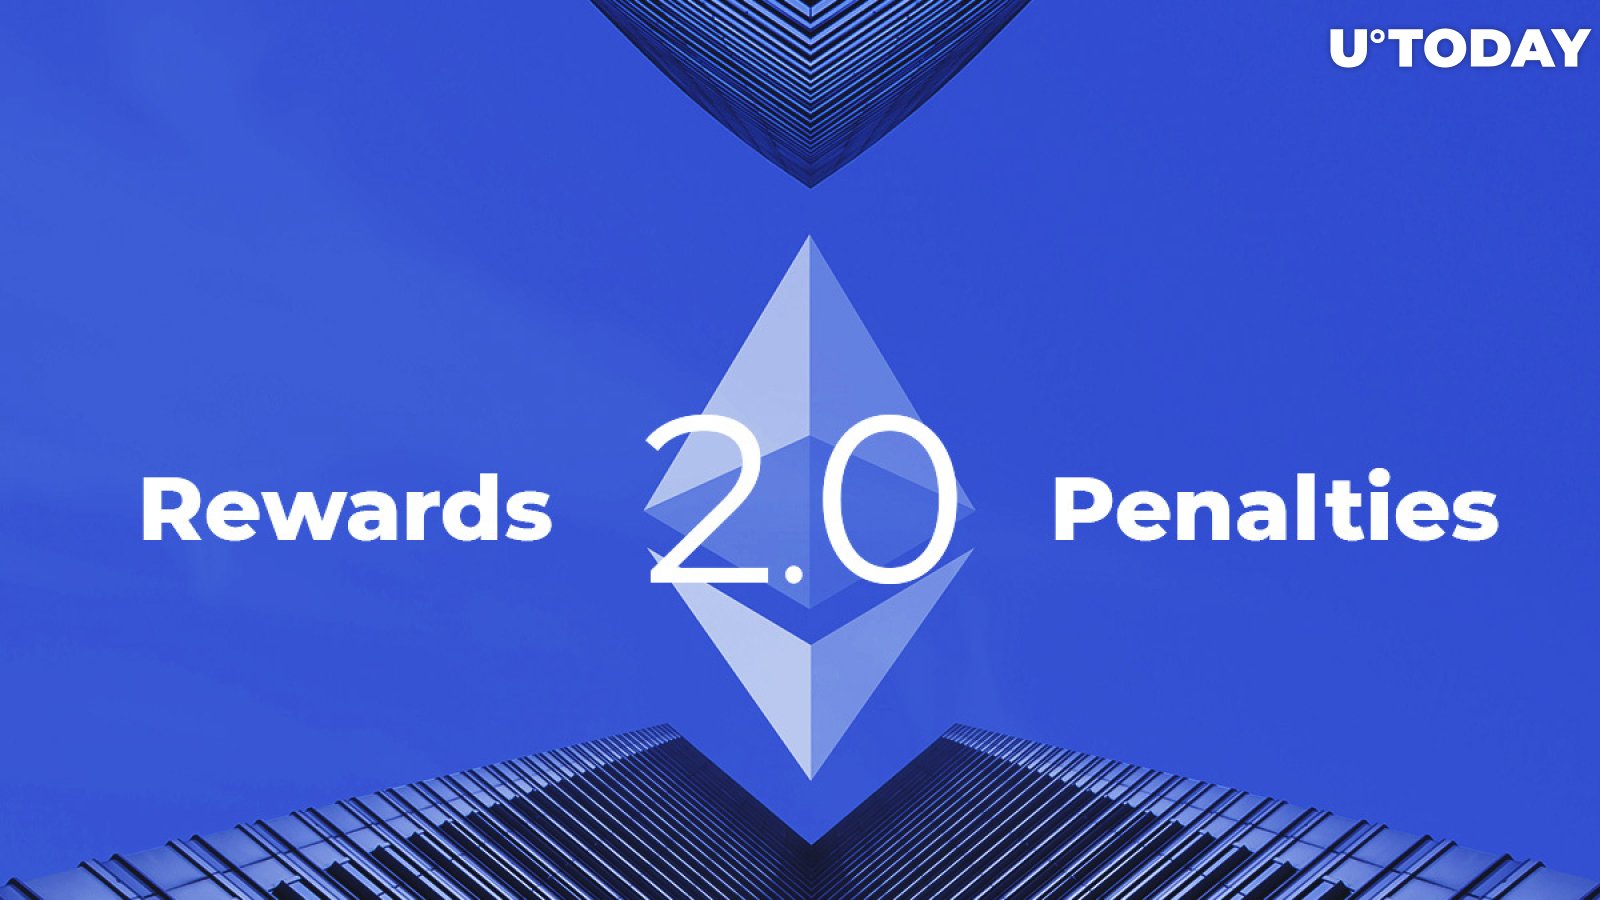 Ethereum (ETH) 2.0 Rewards & Penalties Concept Explained by ConsenSys